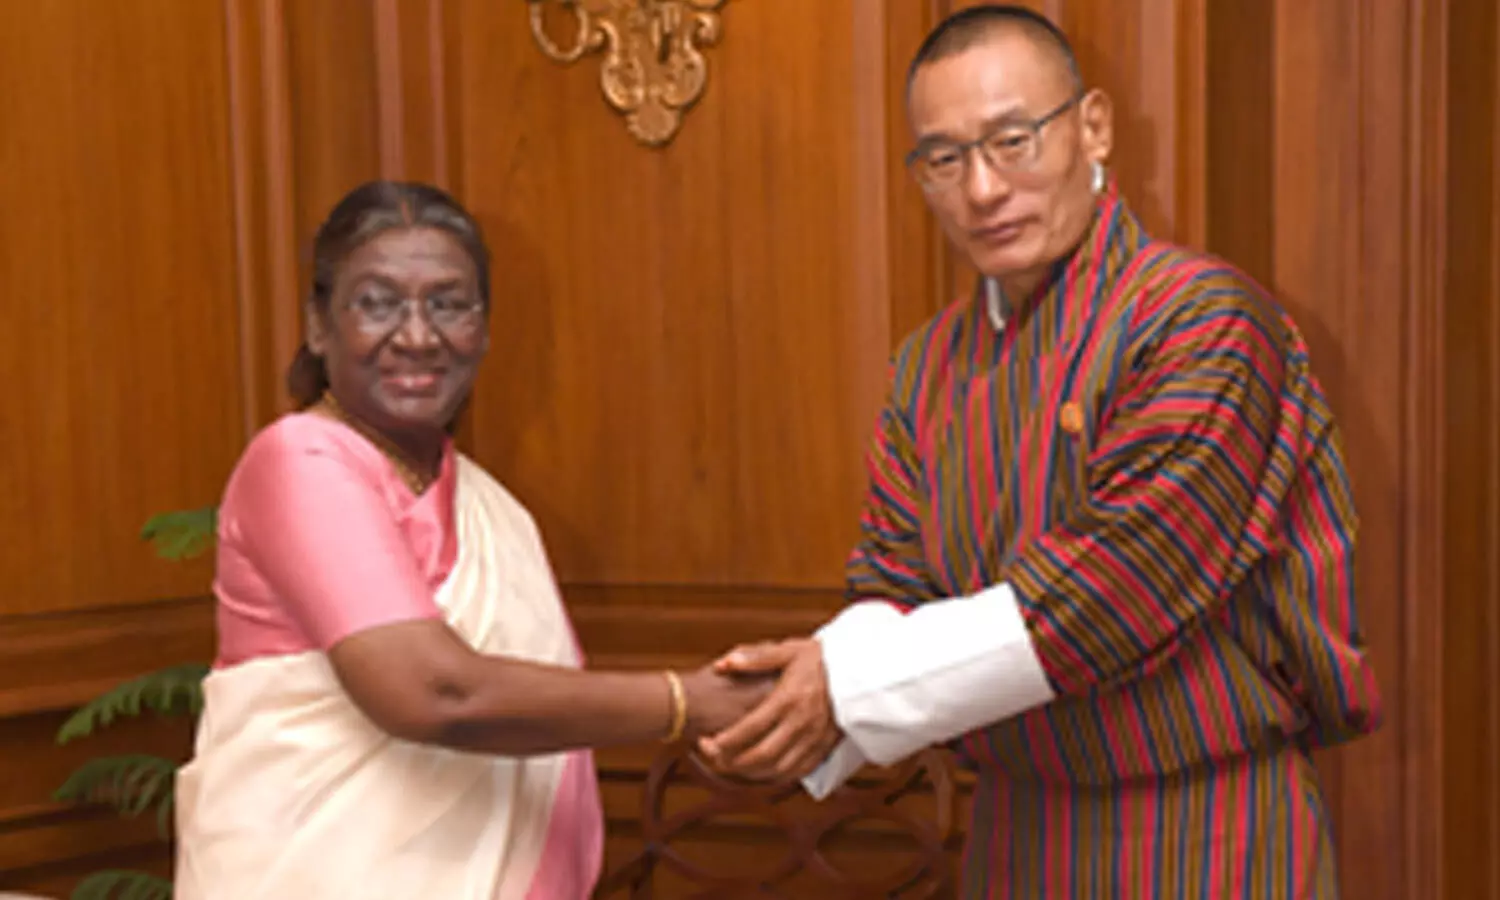 Bhutan can count on India as reliable friend and partner: President Murmu